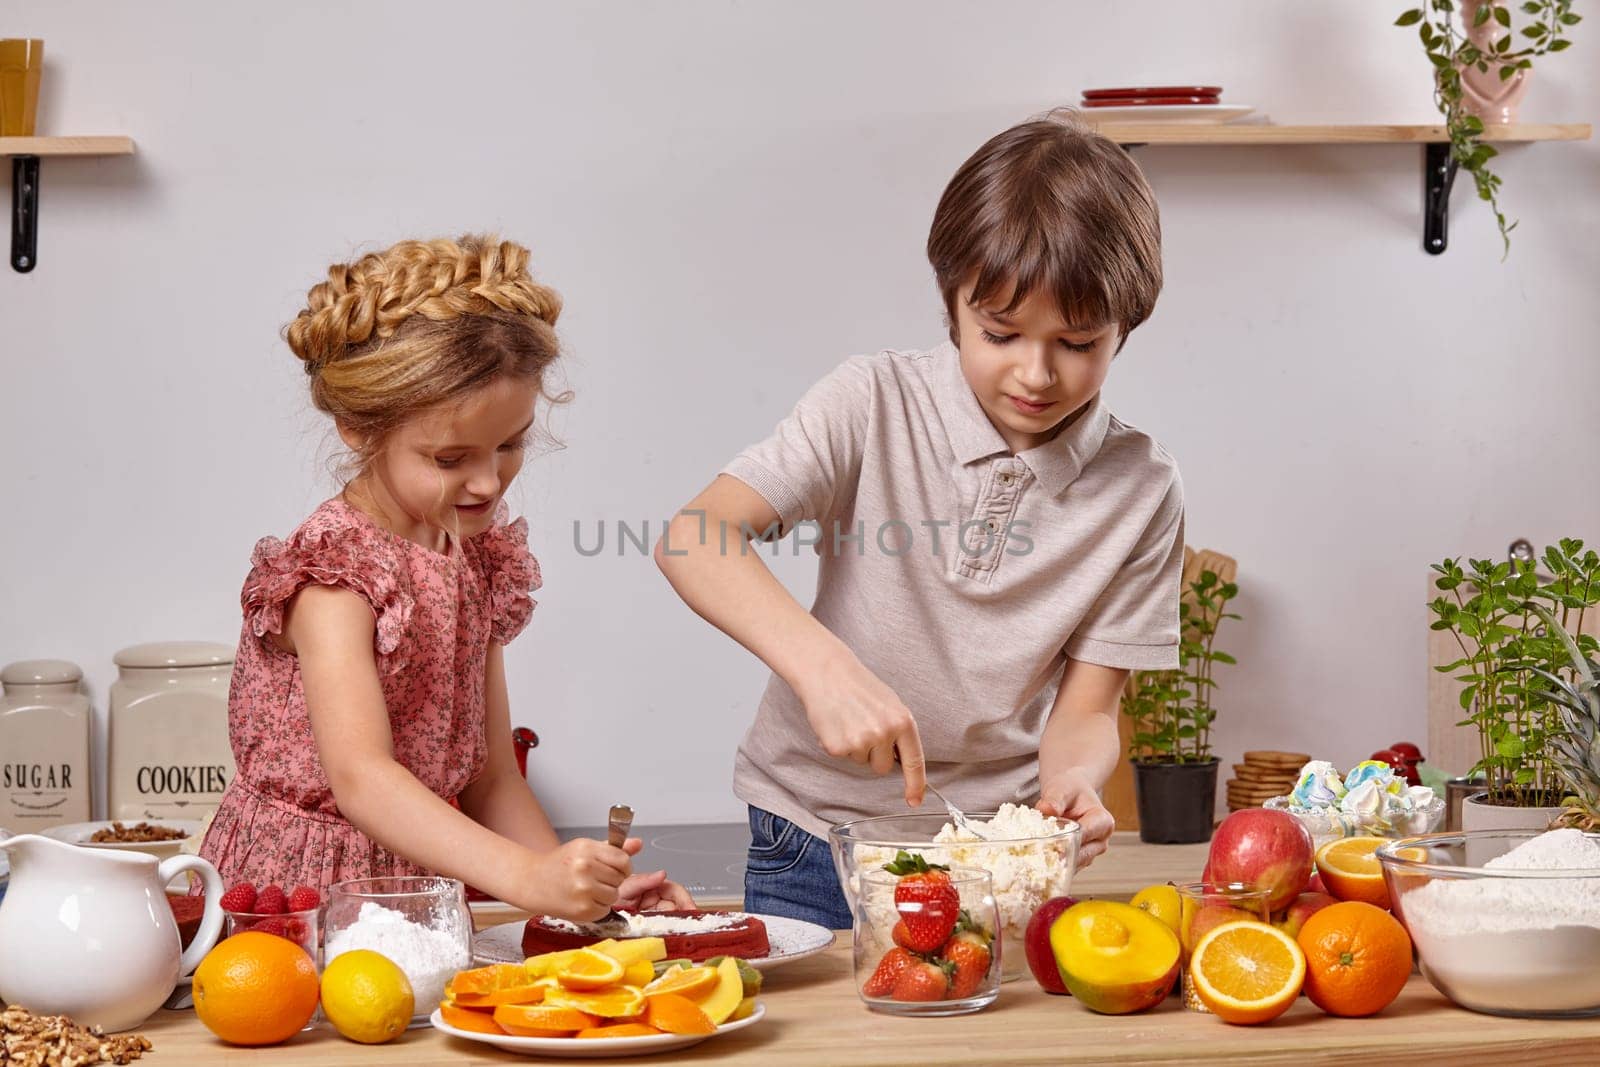 Pretty brunette boy dressed in a light t-shirt and jeans and a charming girl with a braid in her hair, wearing in a pink dress are making a cake at a kitchen, against a white wall with shelves on it. Girl is spreading some cottage cheese on a cake layer and boy is taking more cheese from a bowl.